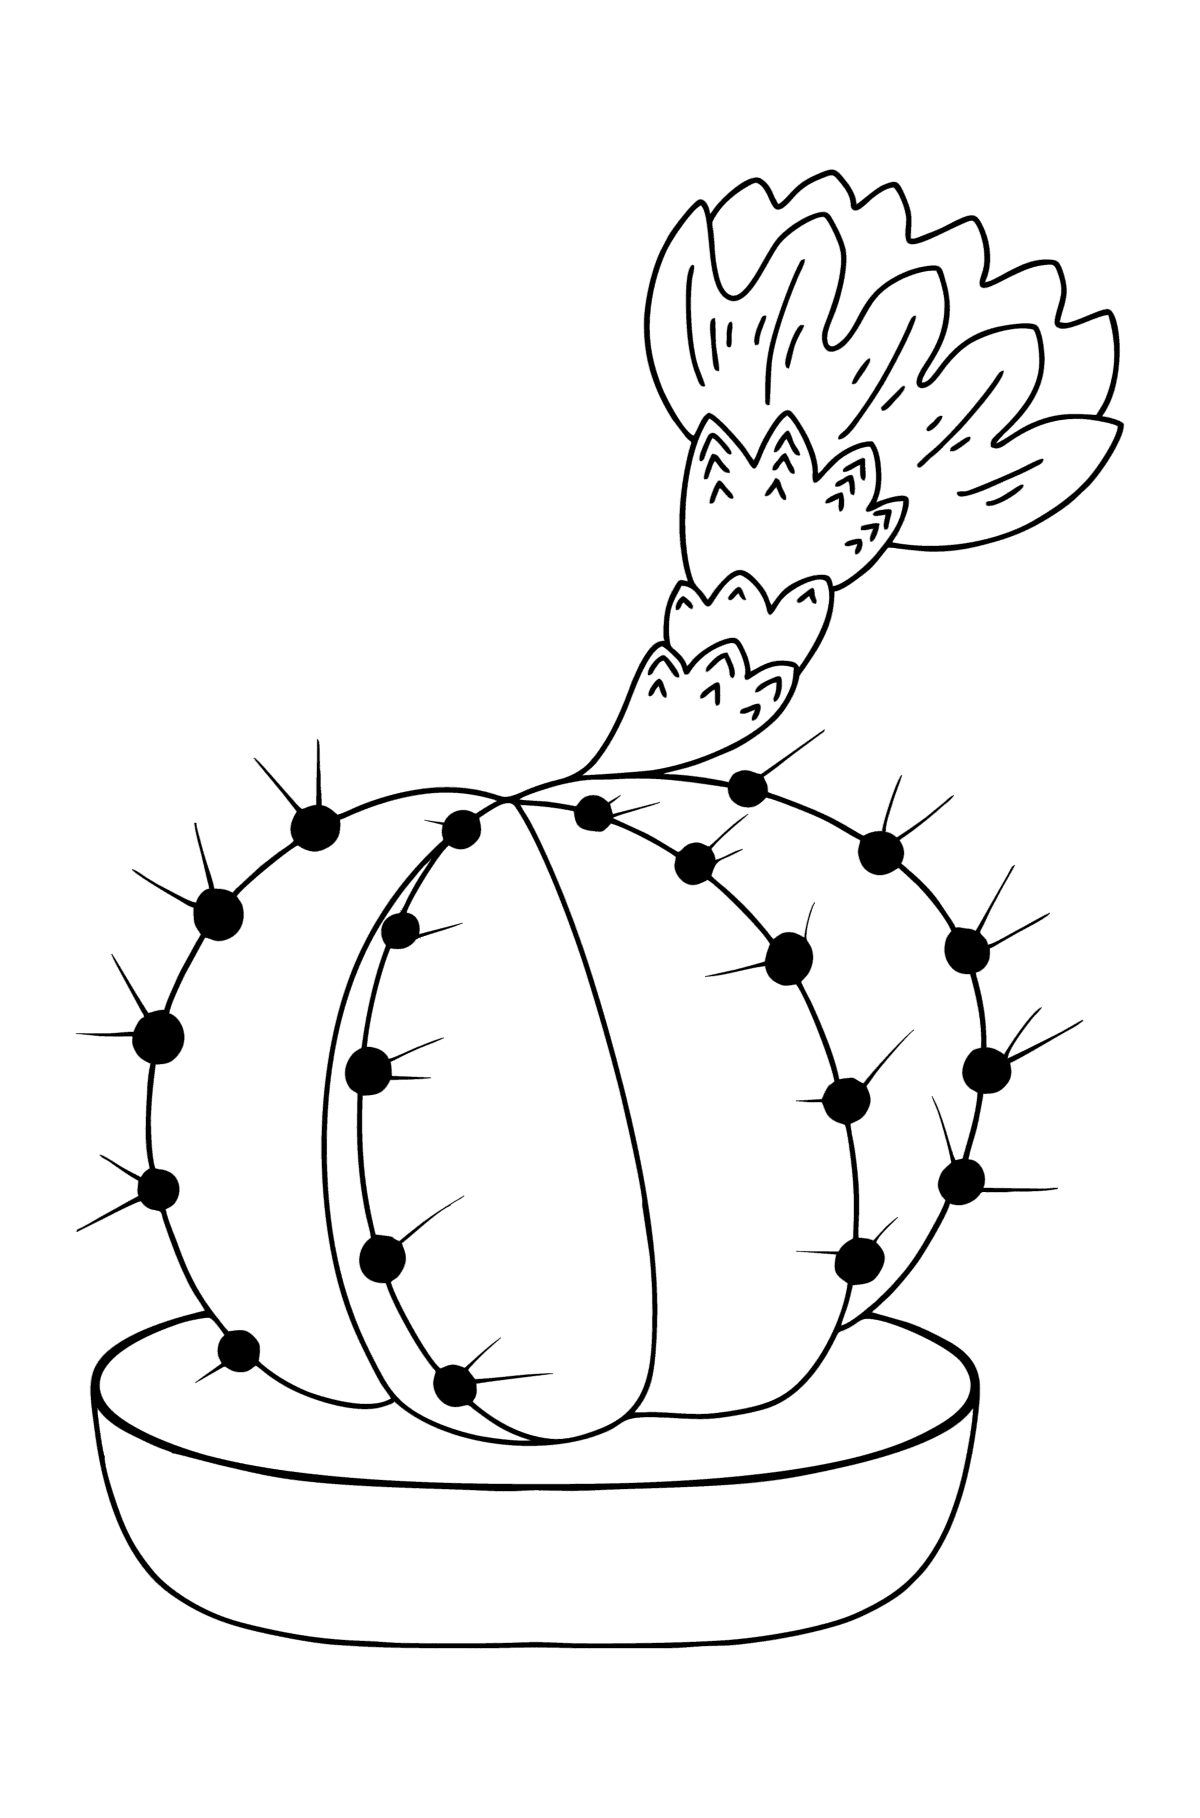 Cute cactus coloring pages - Coloring Pages for Kids